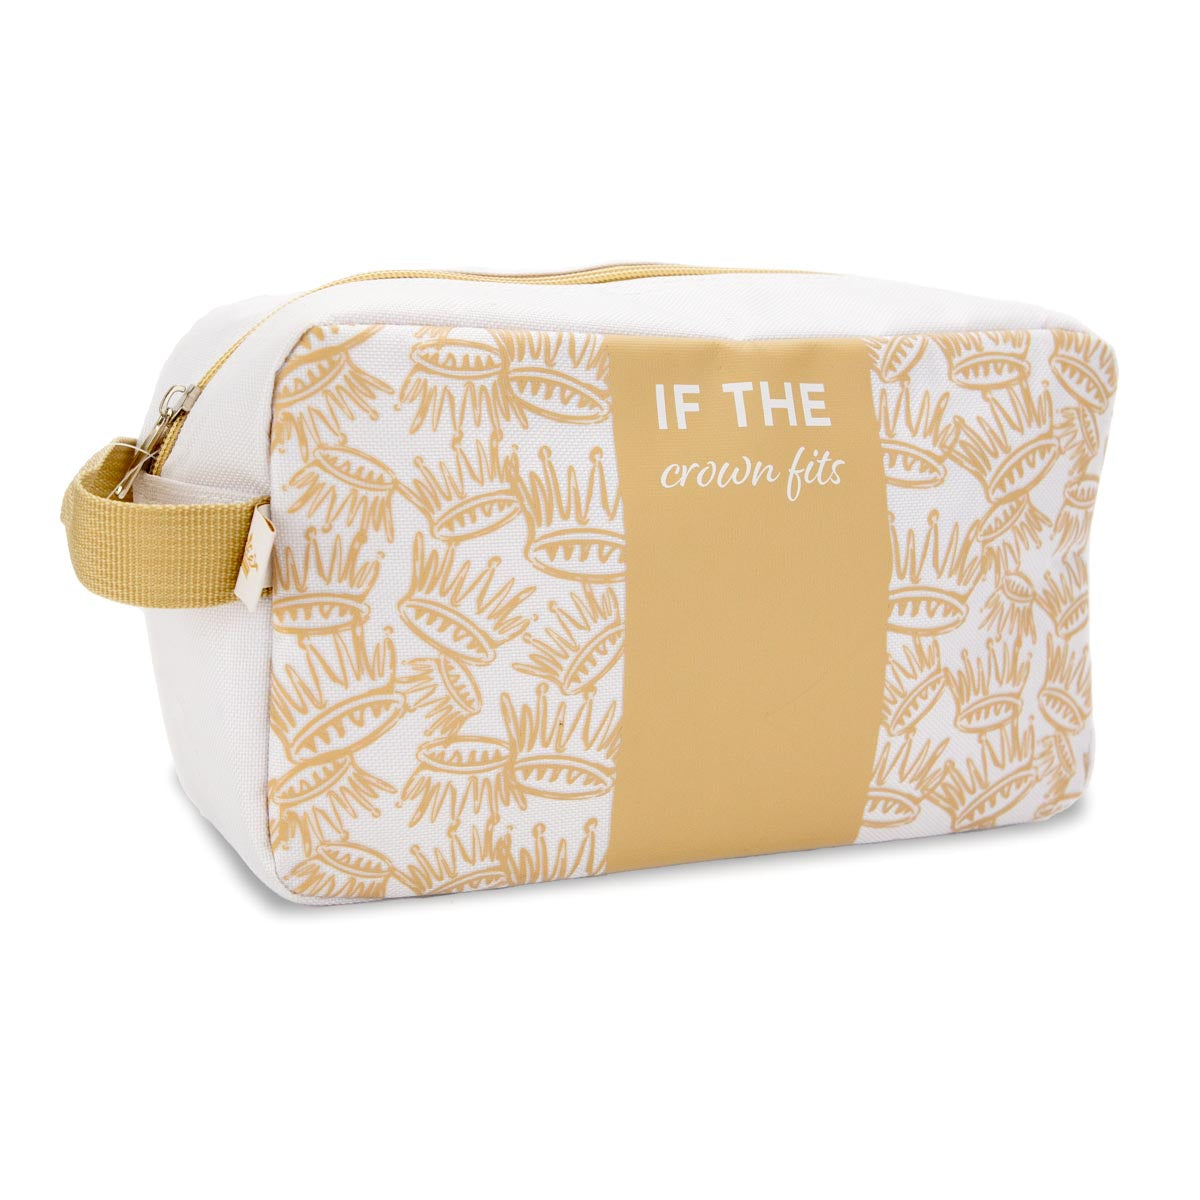 If the crown fits make up bag